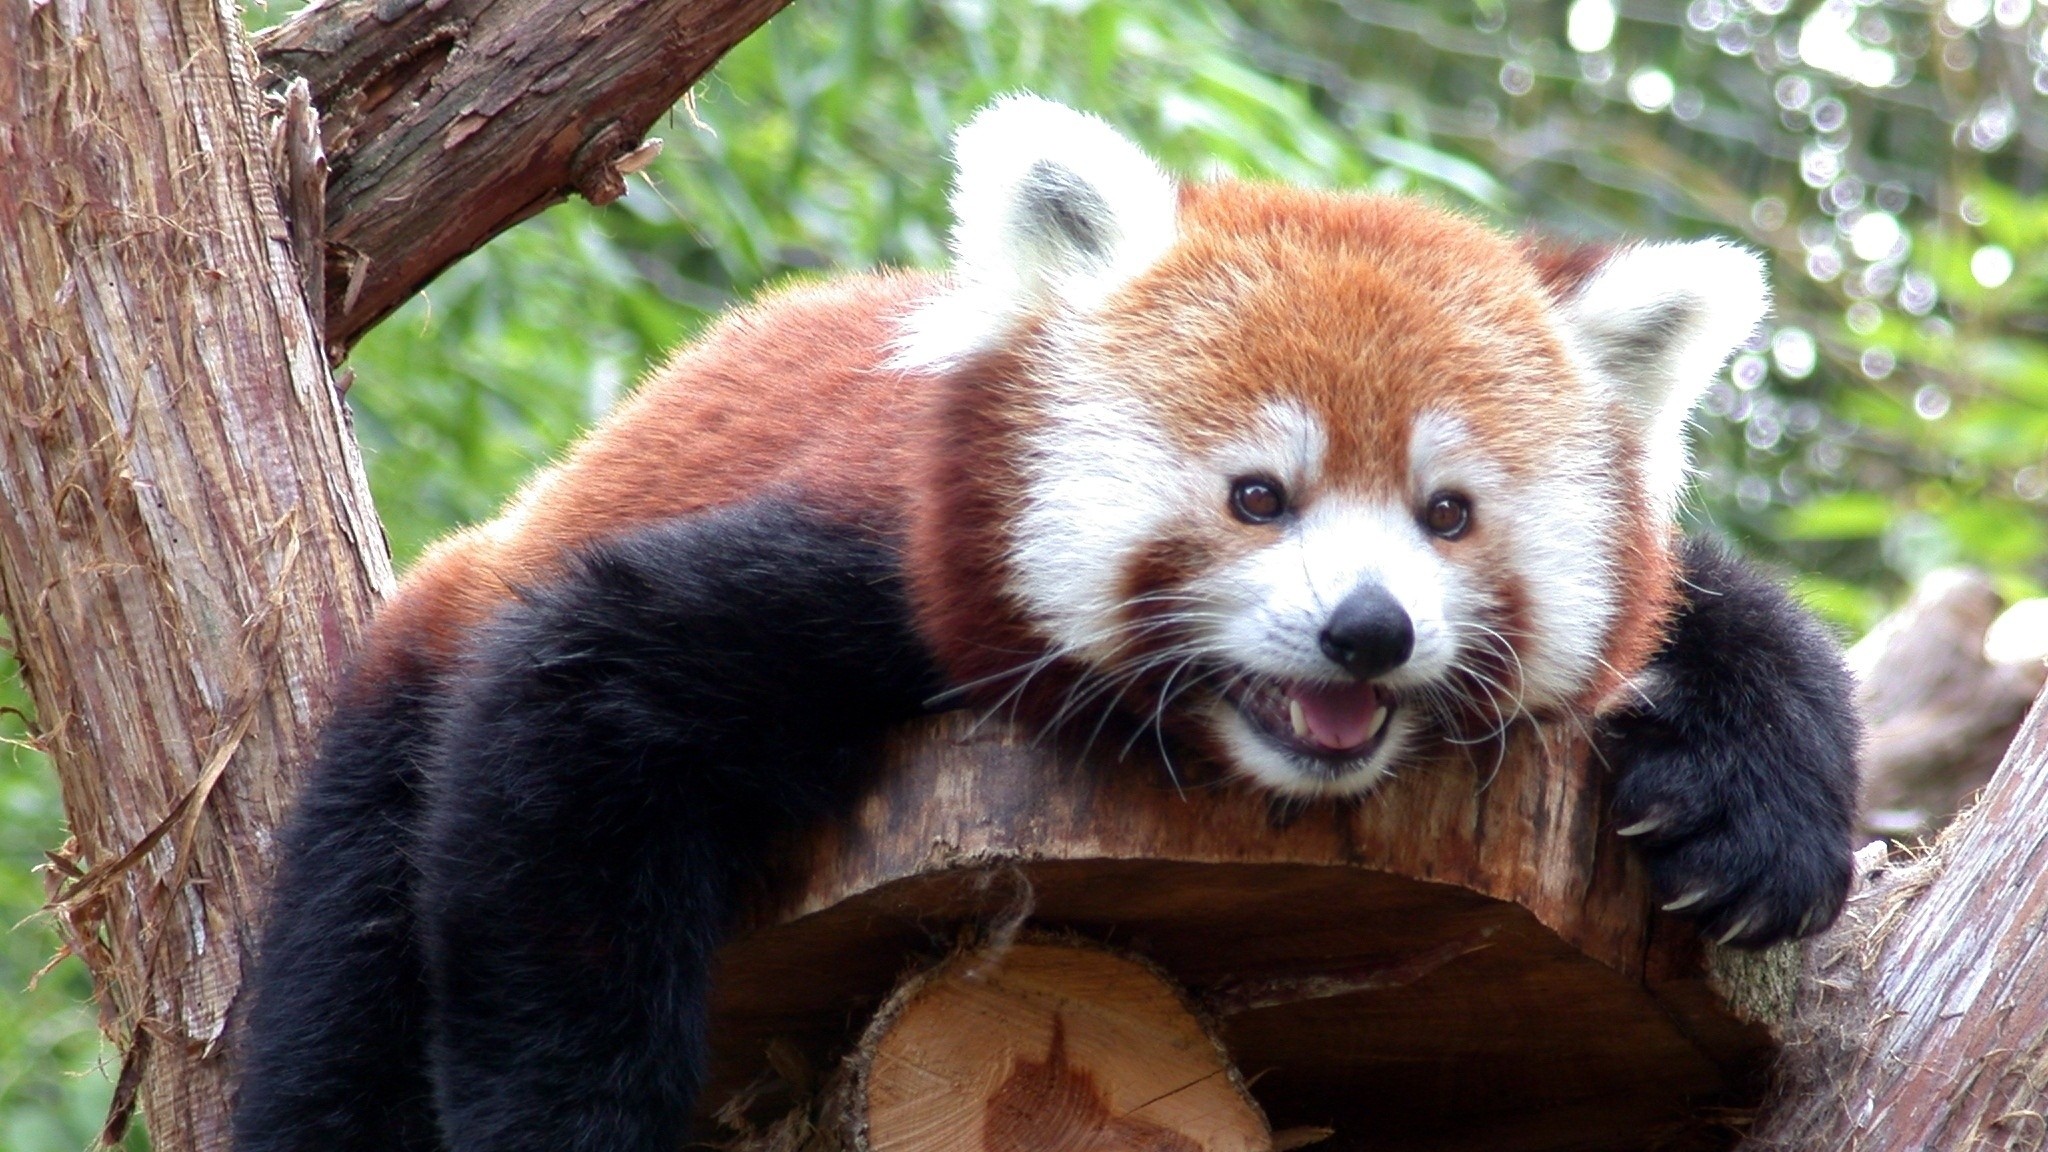 Red Panda Computer Wallpapers Desktop Backgrounds  2560x1600  ID276225   Cute animals Red panda Animal facts